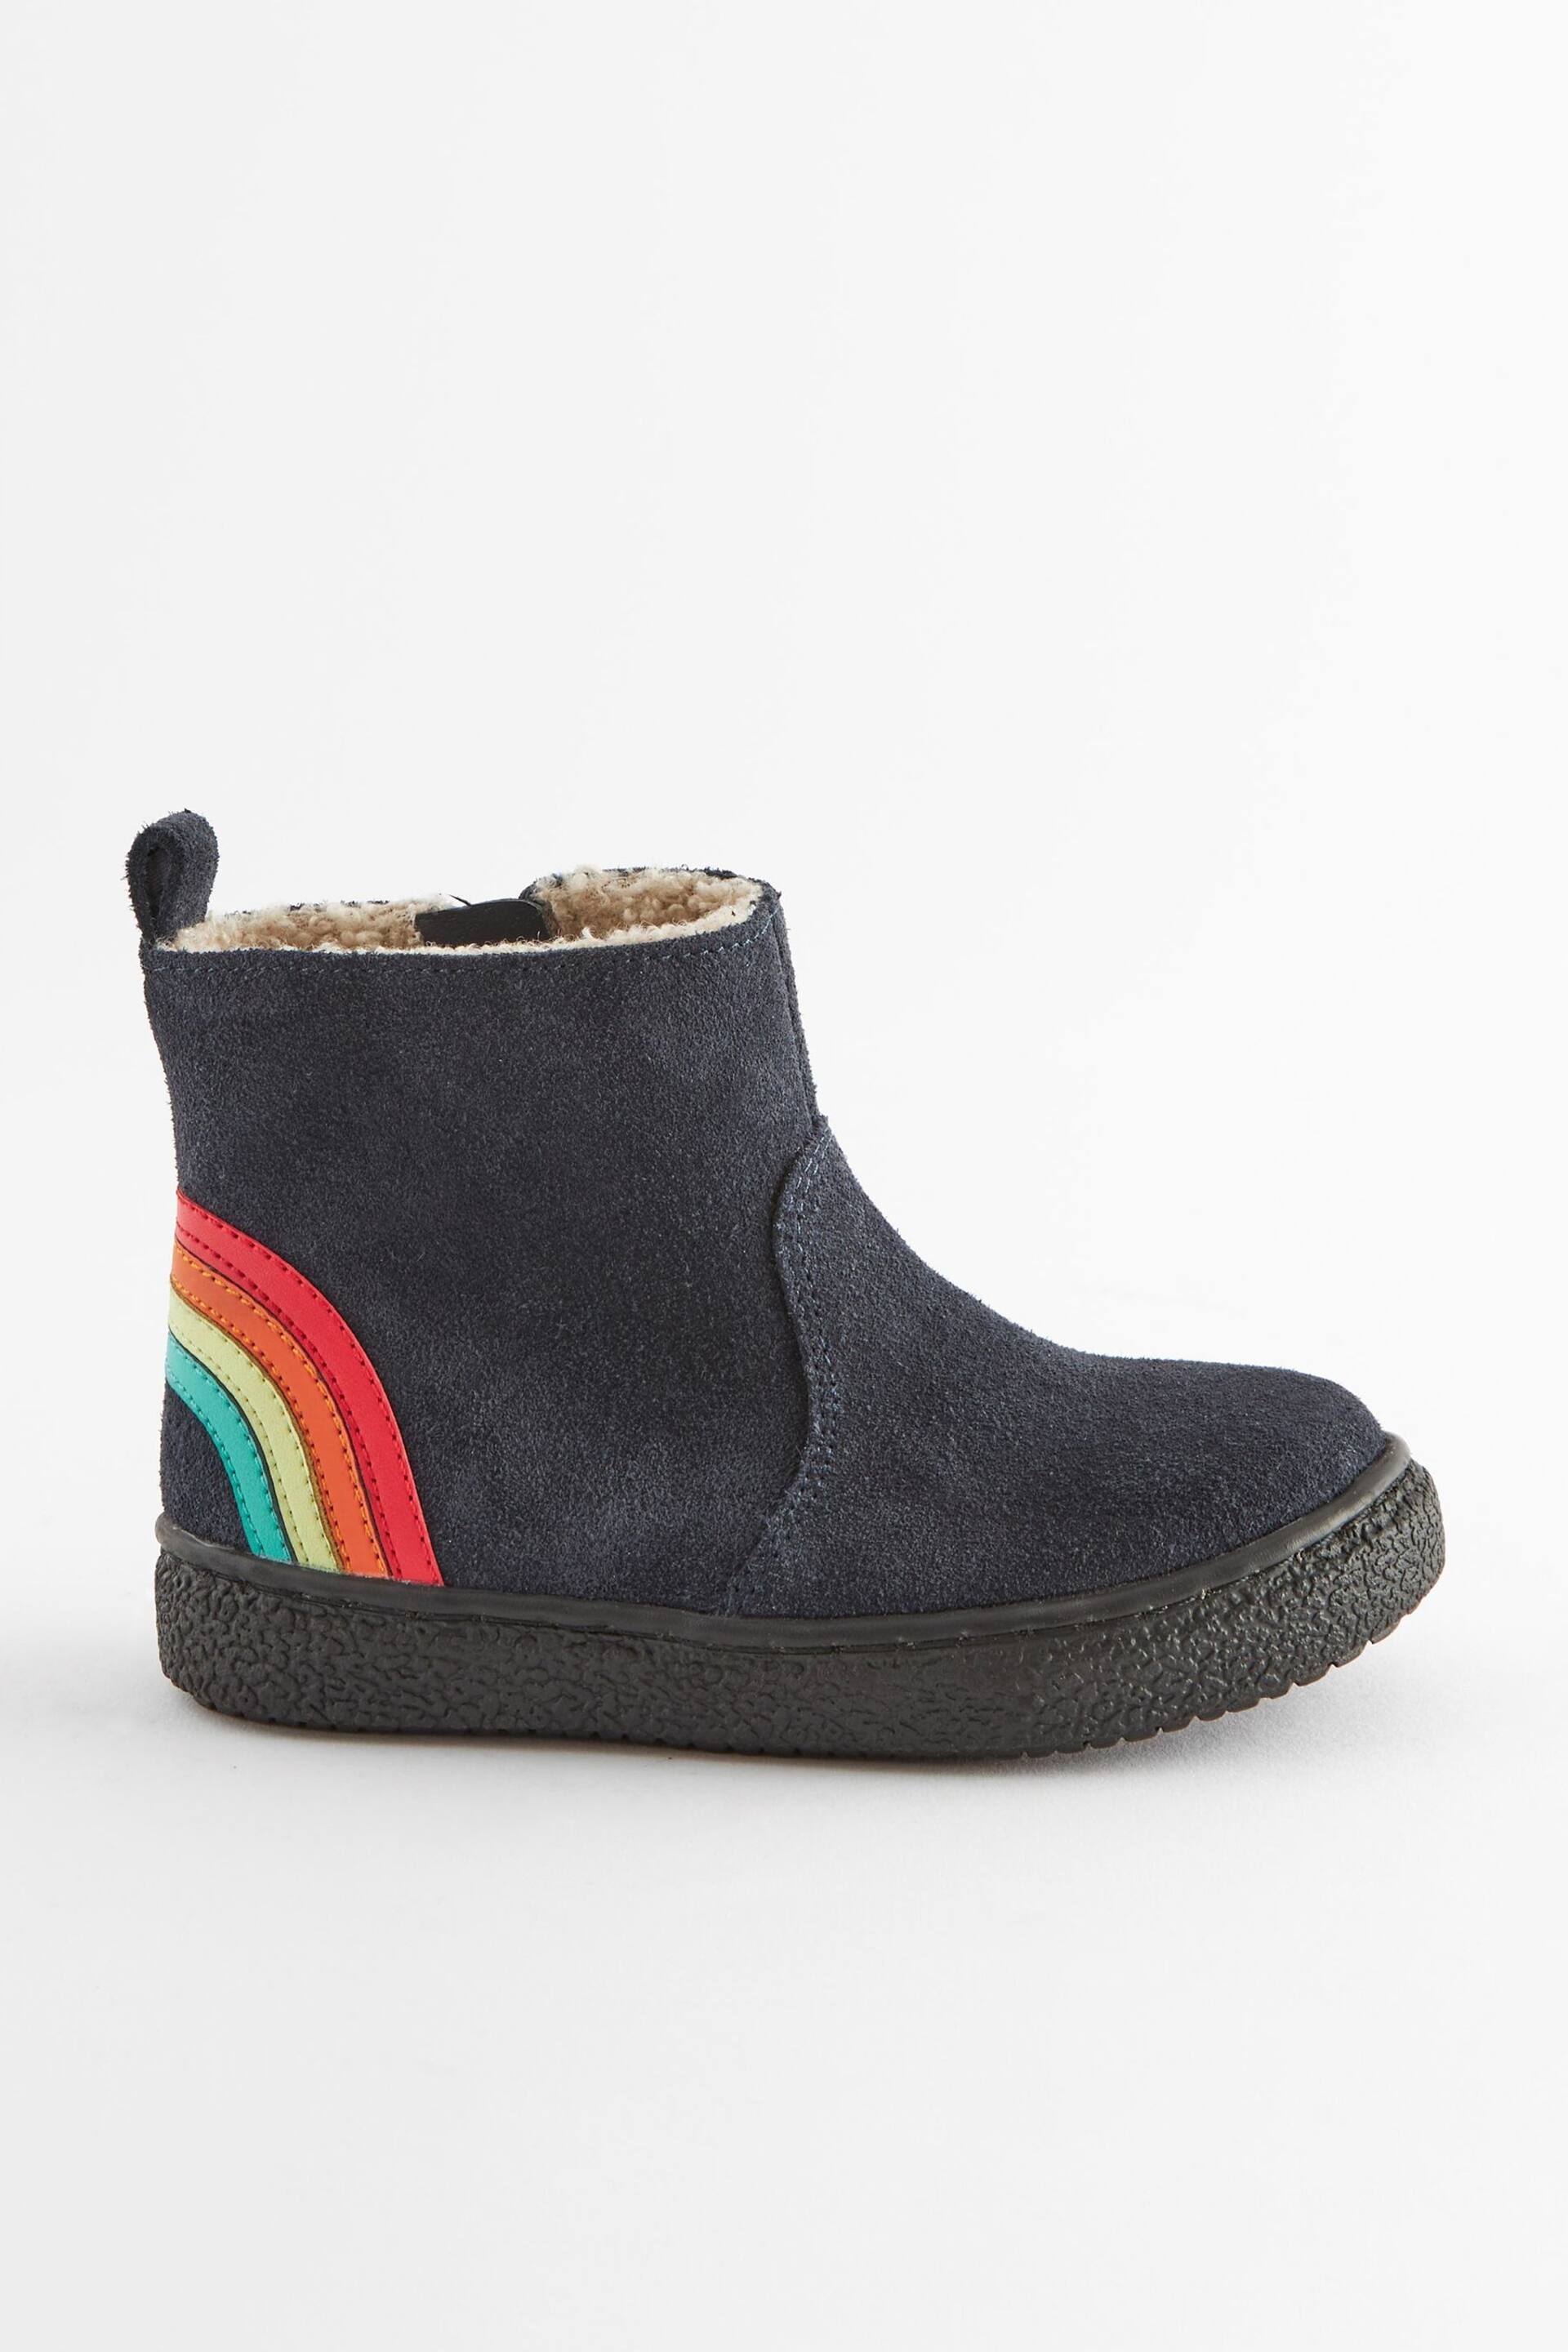 Navy Rainbow Wide Fit (G) Suede Chelsea Boots - Image 2 of 5